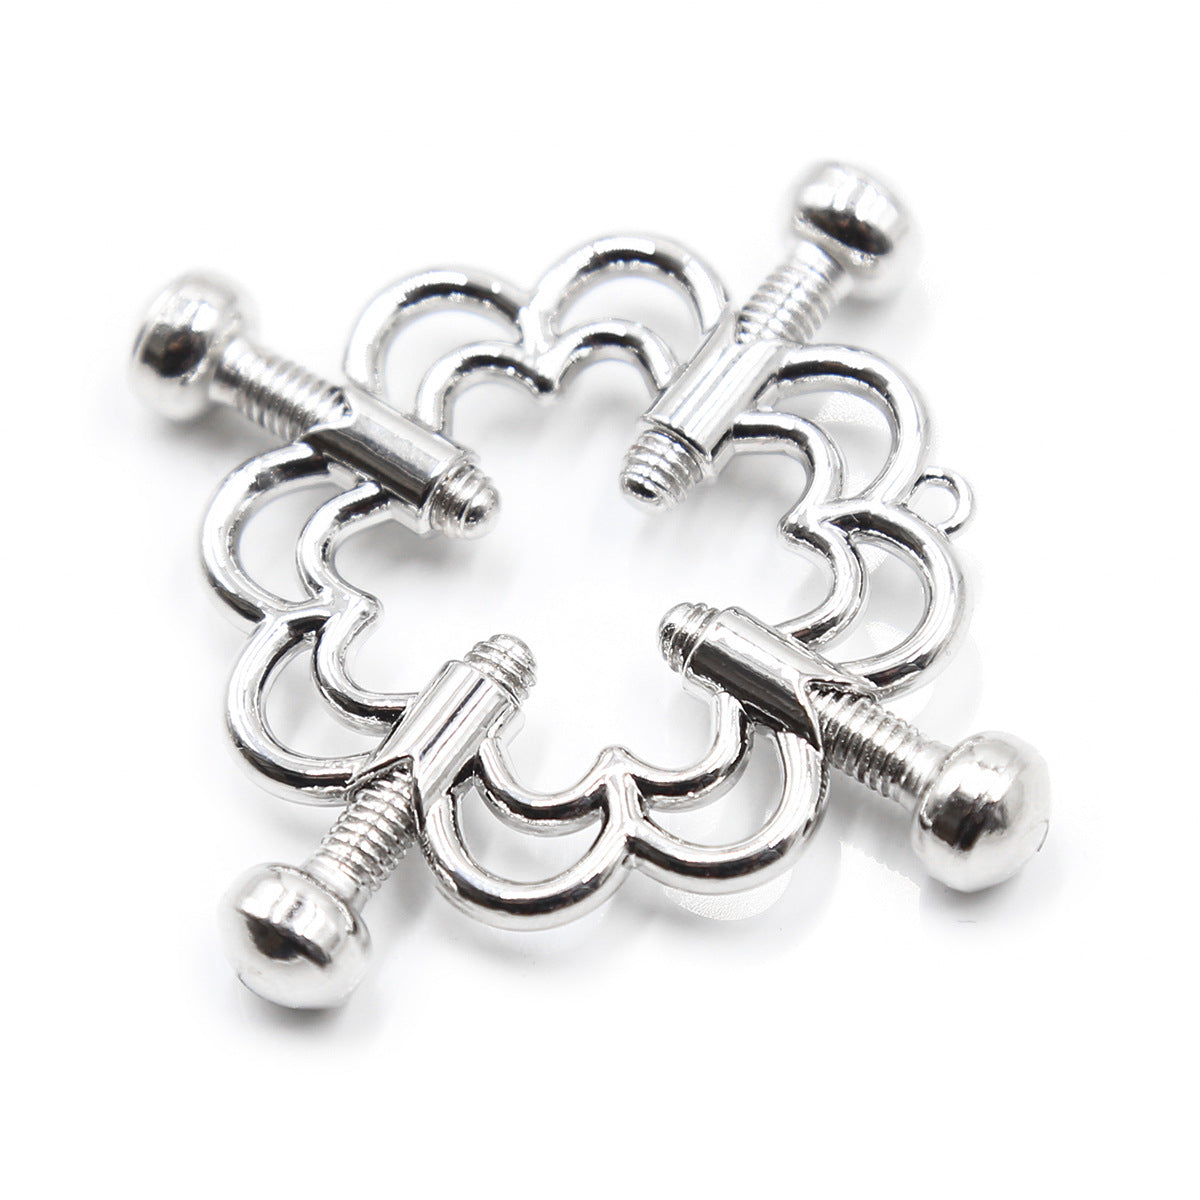 Flower Shaped Screw Tightening Nipple Clamps